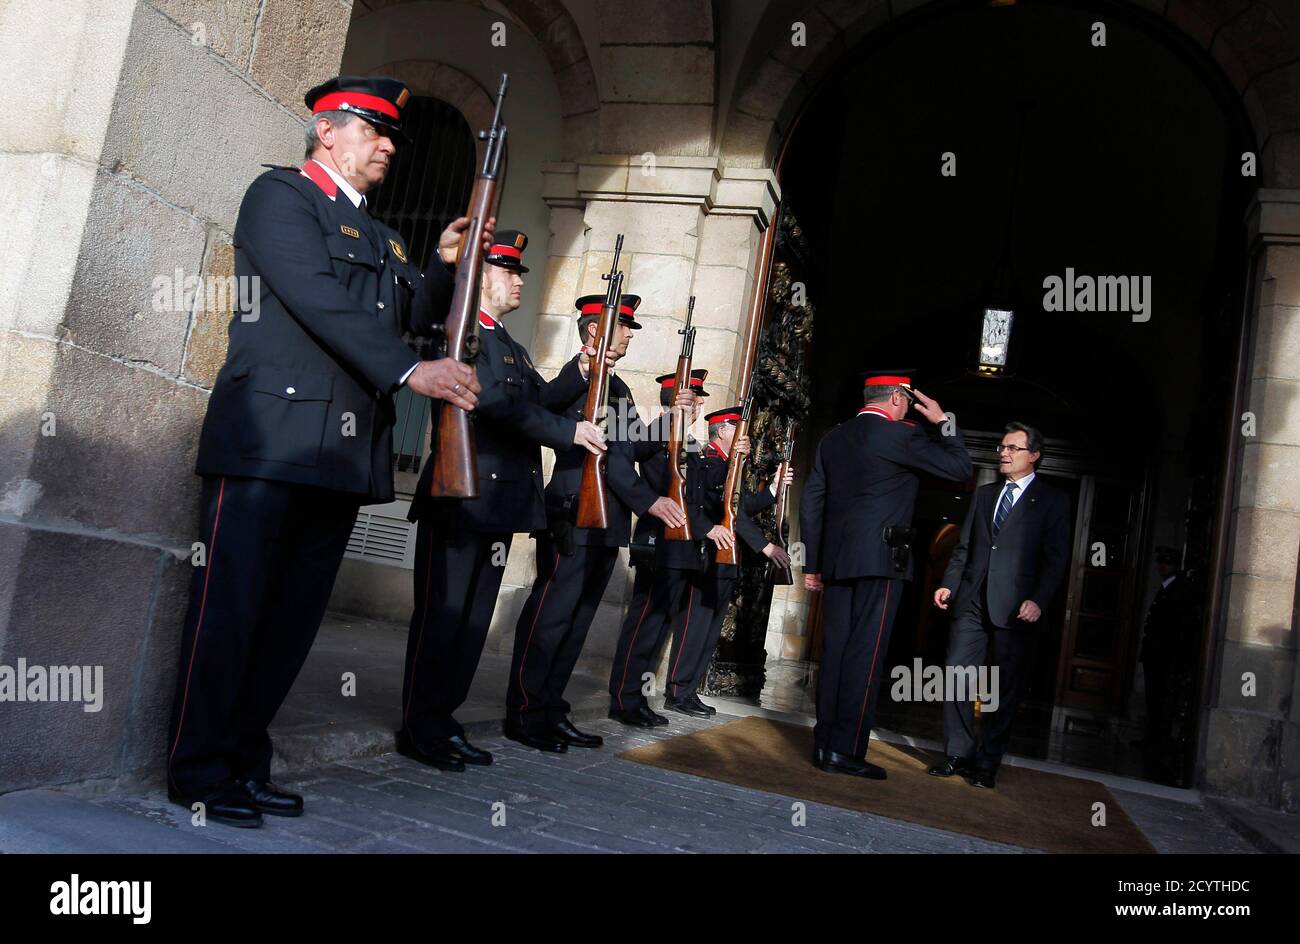 Newly elected President of the Generalitat de Catalunya Artur Mas (CIU party) is saluted by Mossos d'Escuadra (Catalan regional police) as he leaves the Parliament in Barcelona, December 21, 2012.  The leaders of Catalonia's two biggest political forces, CiU and the radical Republican Left, or ERC, signed a pact on Wednesday to overcome their enormous divide on economic and social issues and defy Madrid by holding a referendum on secession from Spain in 2014. REUTERS/Albert Gea (SPAIN - Tags: POLITICS ELECTIONS) Stock Photo